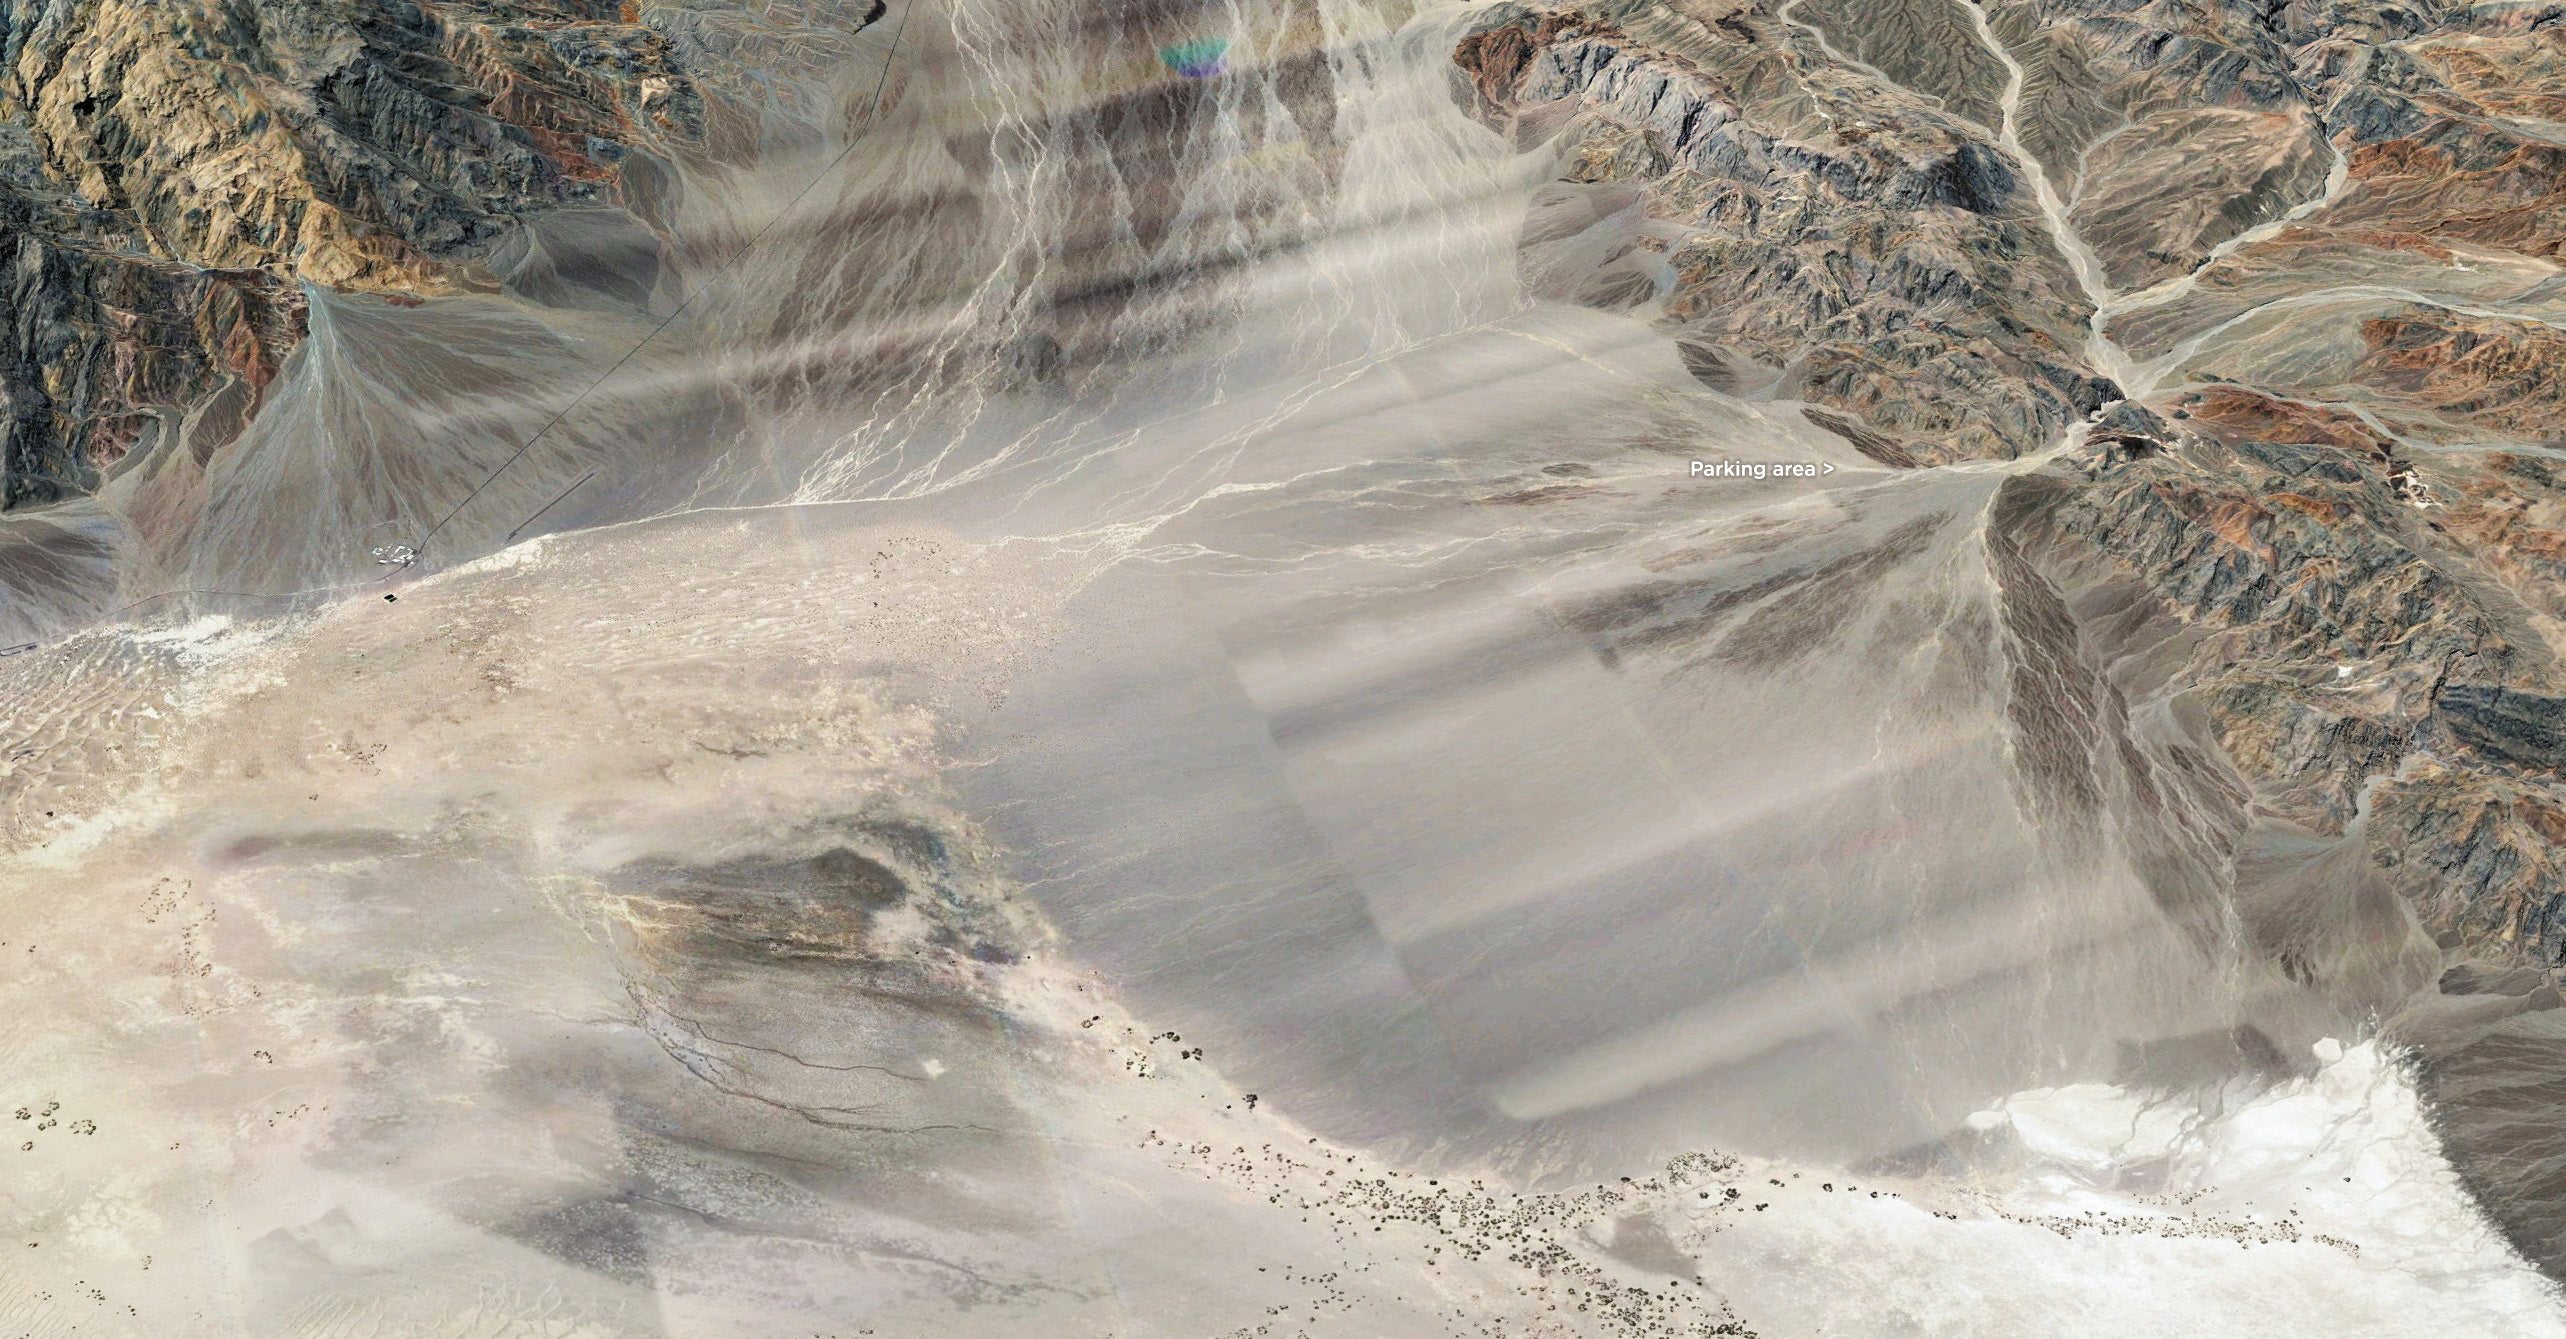 Google Earth Satellite Image, Alluvial Fans, Stovepipe Wells, Mesquite Flats